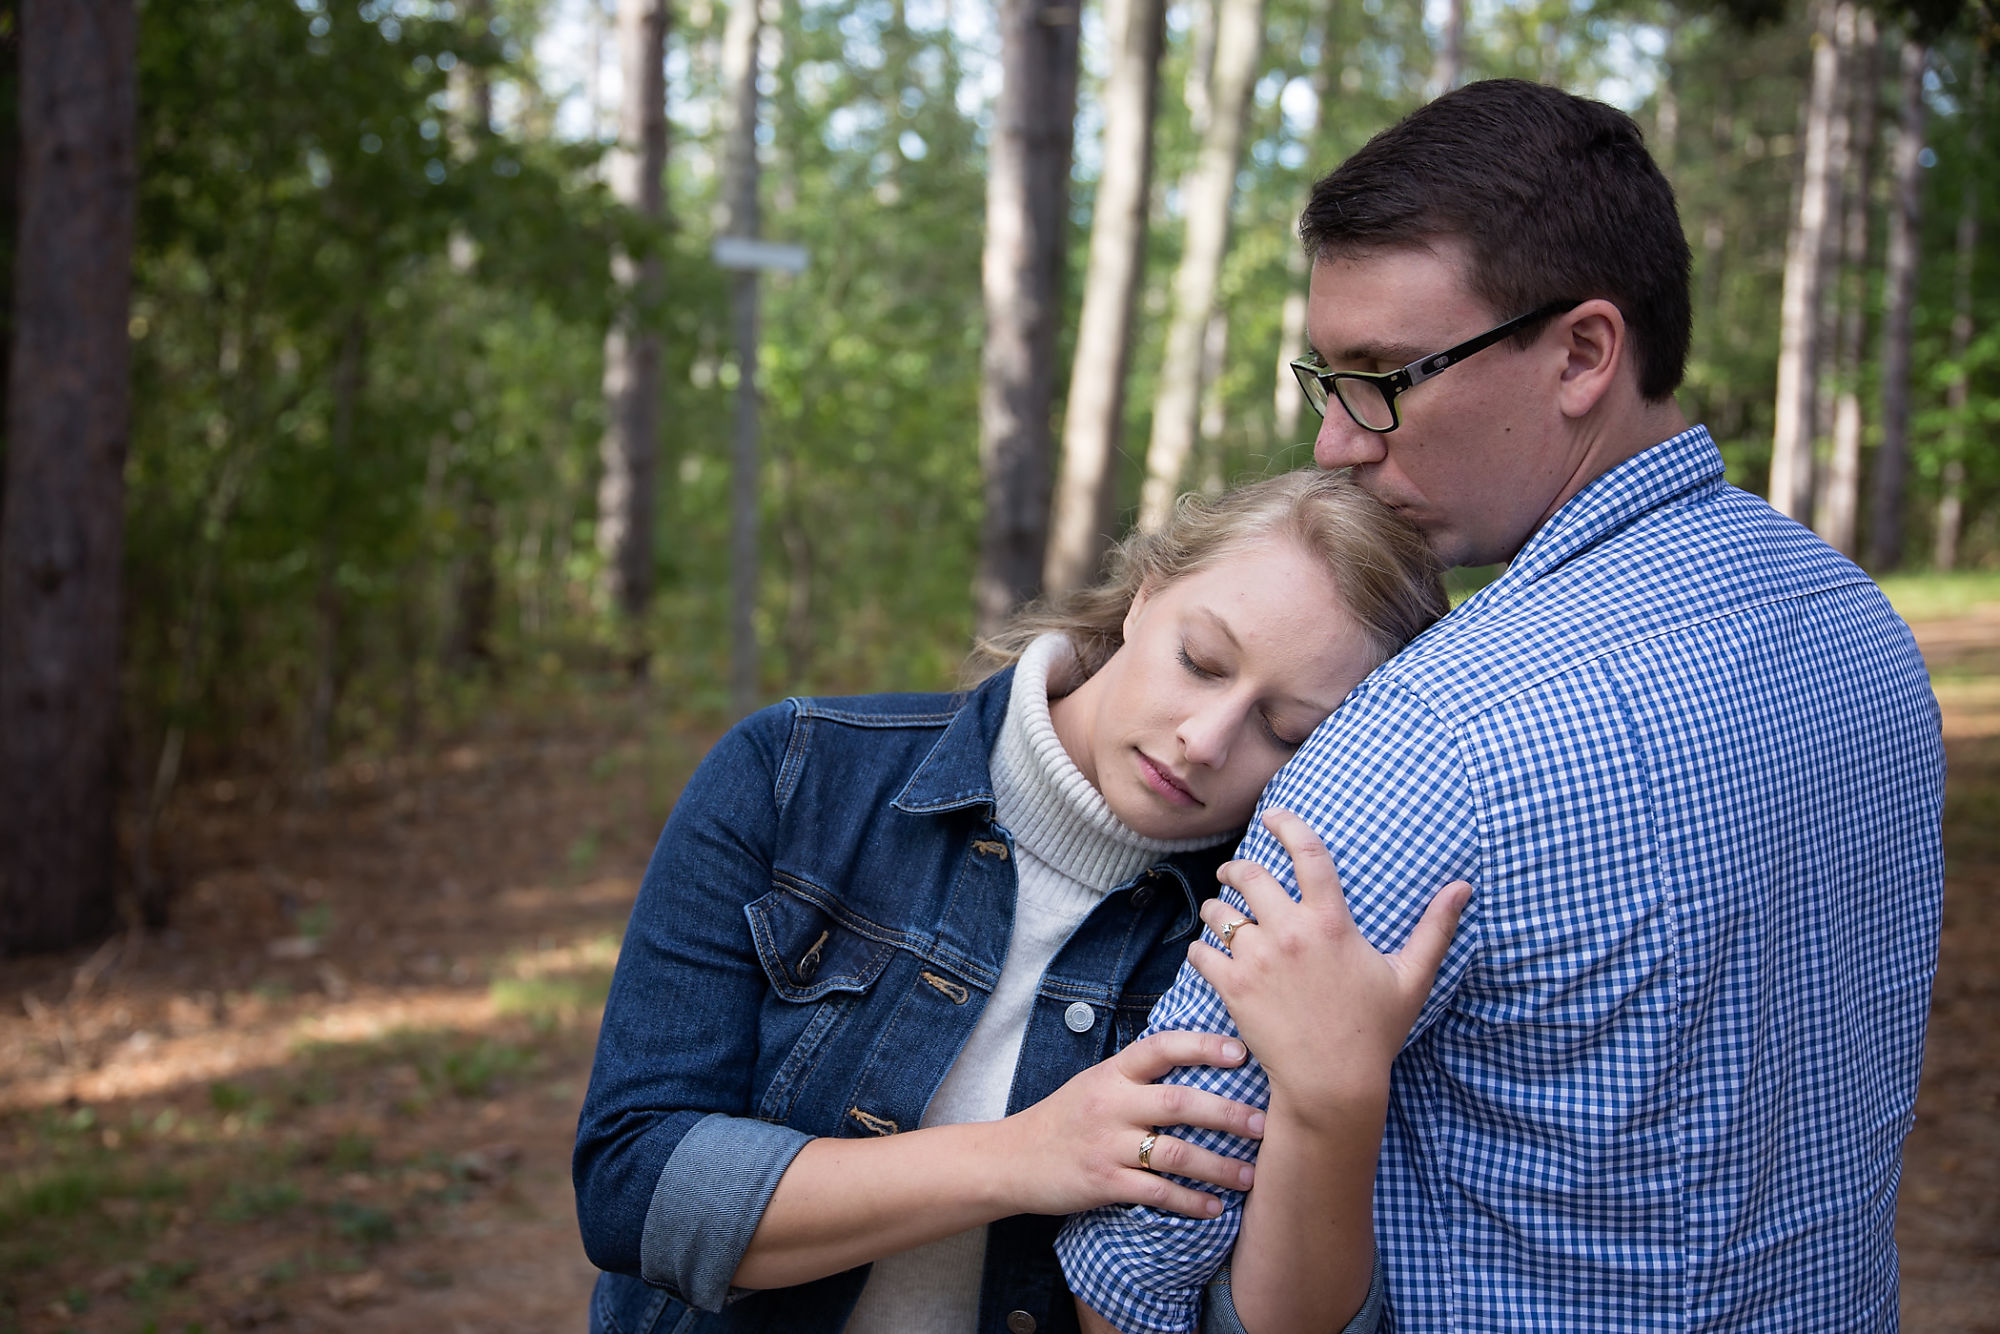 Nick kisses his fiance gently on the head as they embrace in the forest during their engagement shoot with Waterdown Engagement Photographer Jennifer Blaak.